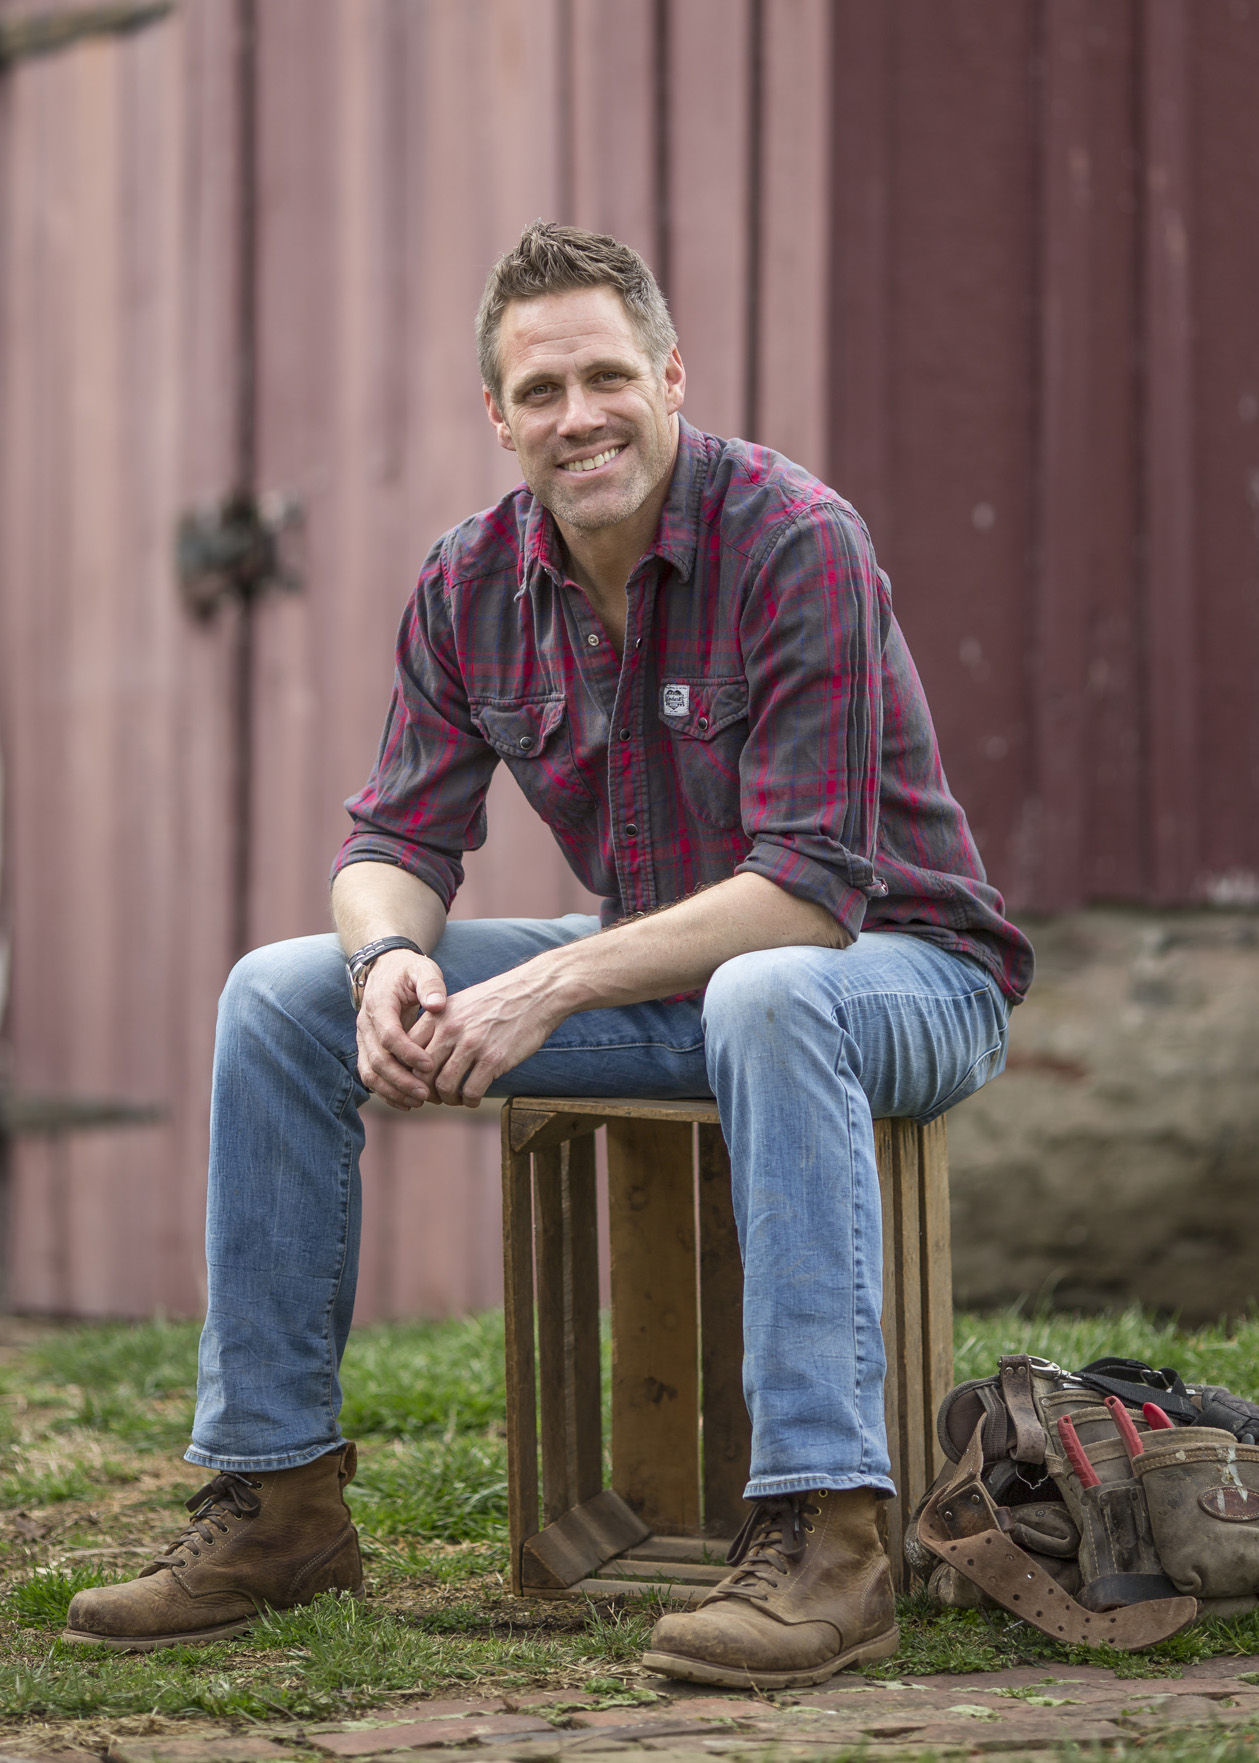 Jeff Devlin, licensed contractor and host of DIY Network's Stone House Revival